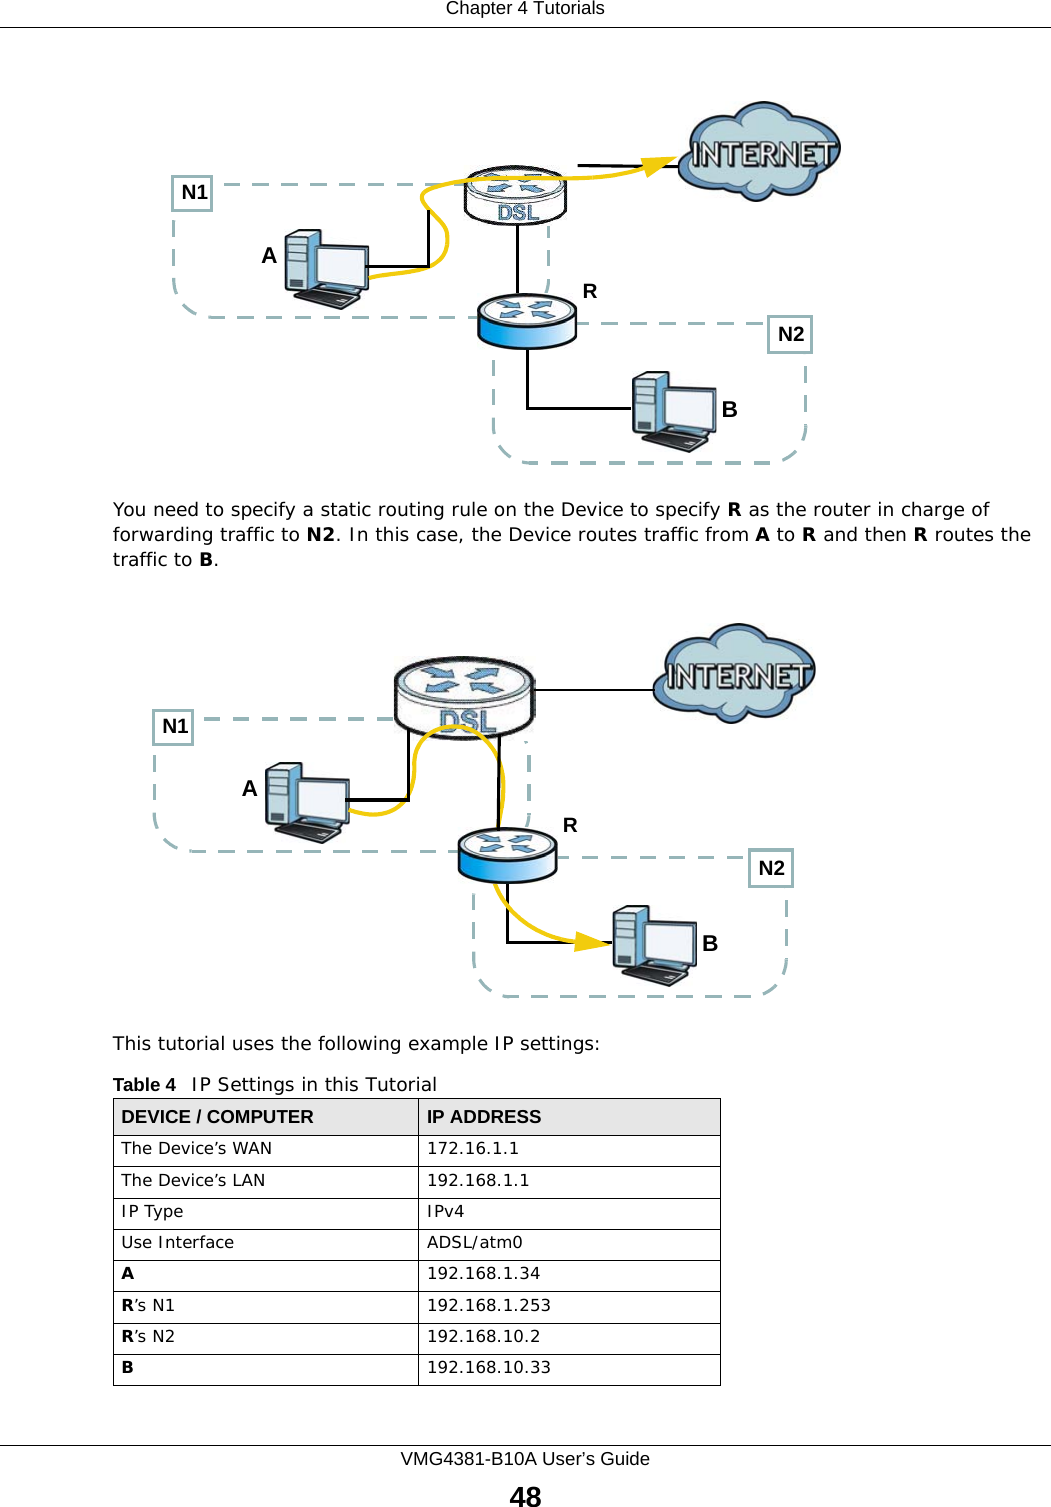 Chapter 4 TutorialsVMG4381-B10A User’s Guide48You need to specify a static routing rule on the Device to specify R as the router in charge of forwarding traffic to N2. In this case, the Device routes traffic from A to R and then R routes the traffic to B.This tutorial uses the following example IP settings:Table 4   IP Settings in this TutorialDEVICE / COMPUTER IP ADDRESSThe Device’s WAN 172.16.1.1The Device’s LAN 192.168.1.1IP Type IPv4Use Interface ADSL/atm0A192.168.1.34R’s N1  192.168.1.253R’s N2  192.168.10.2B192.168.10.33N2BN1ARN2BN1AR